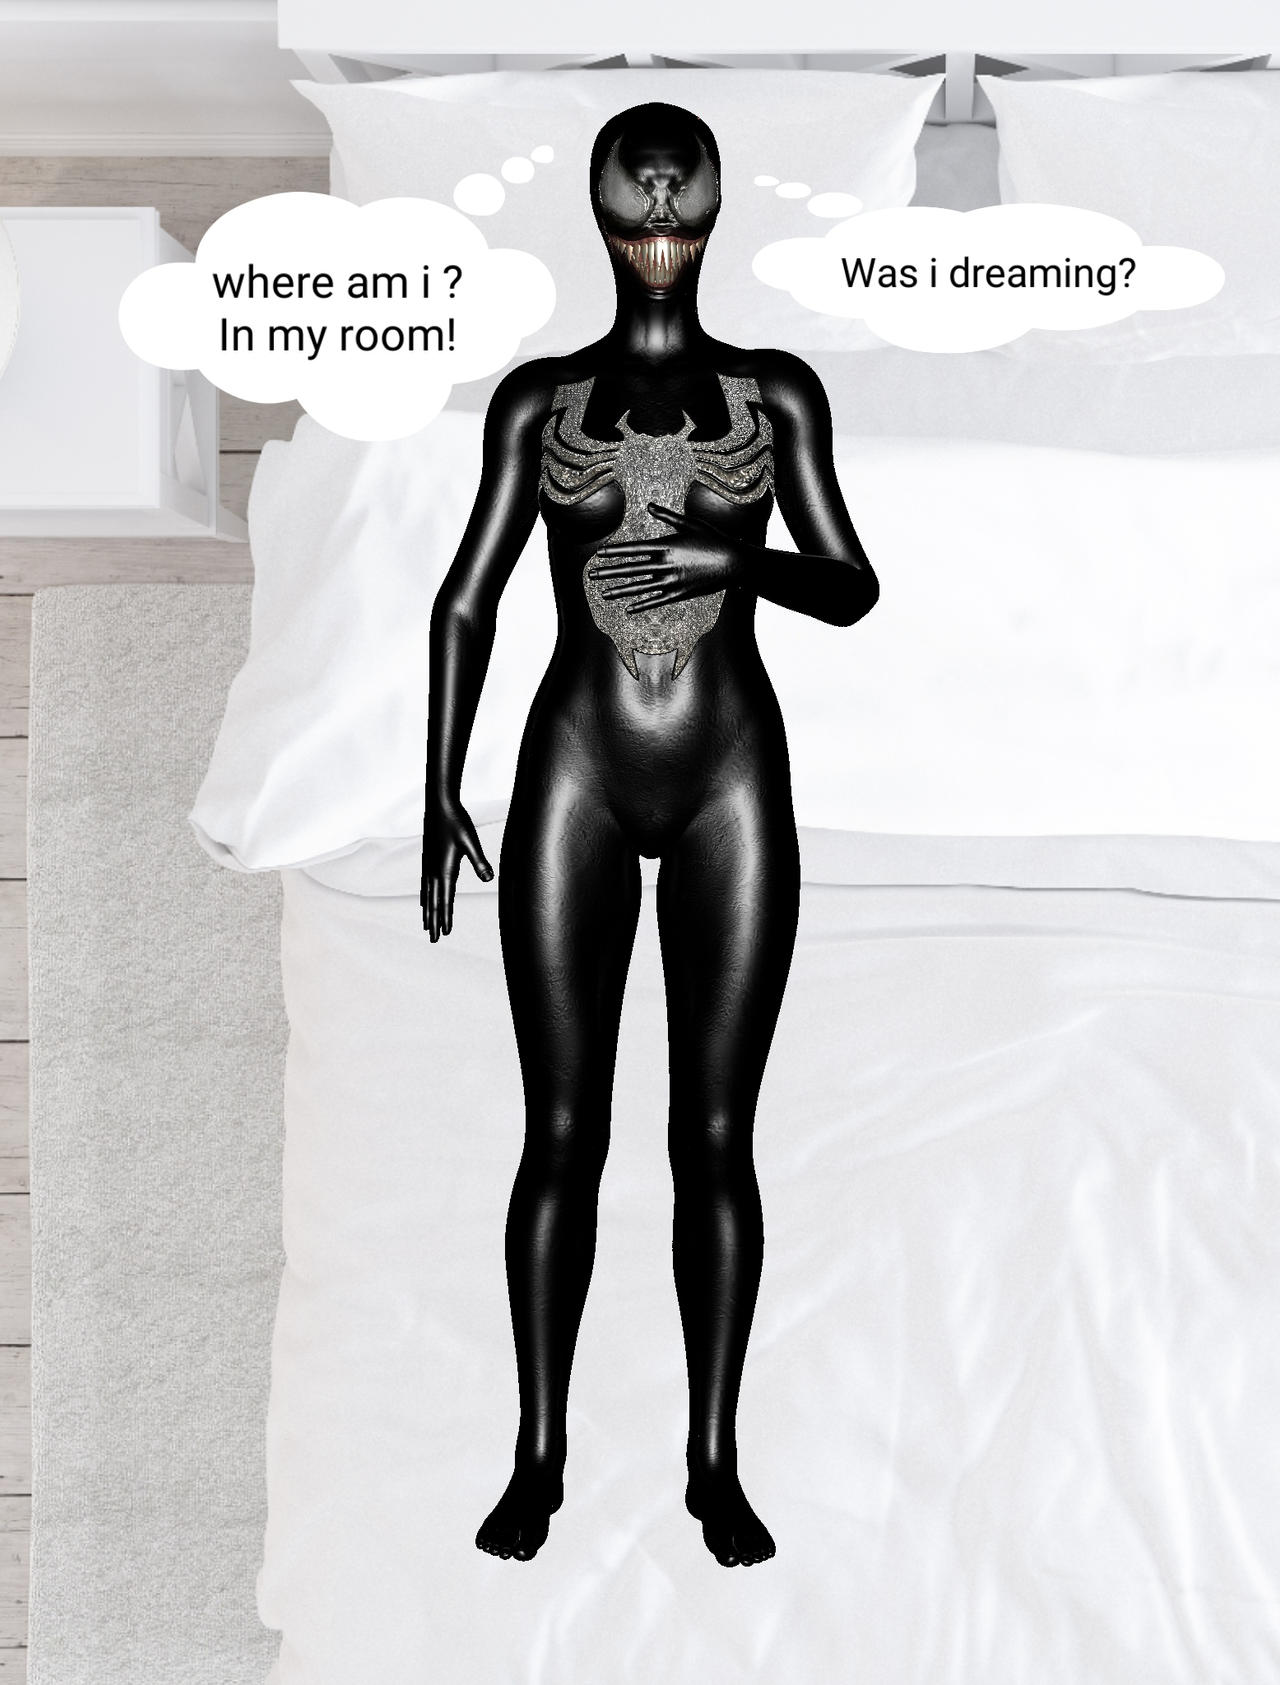 Mary jane wakes up at her room the symbiote took her body control as she faded and travelled back to her room